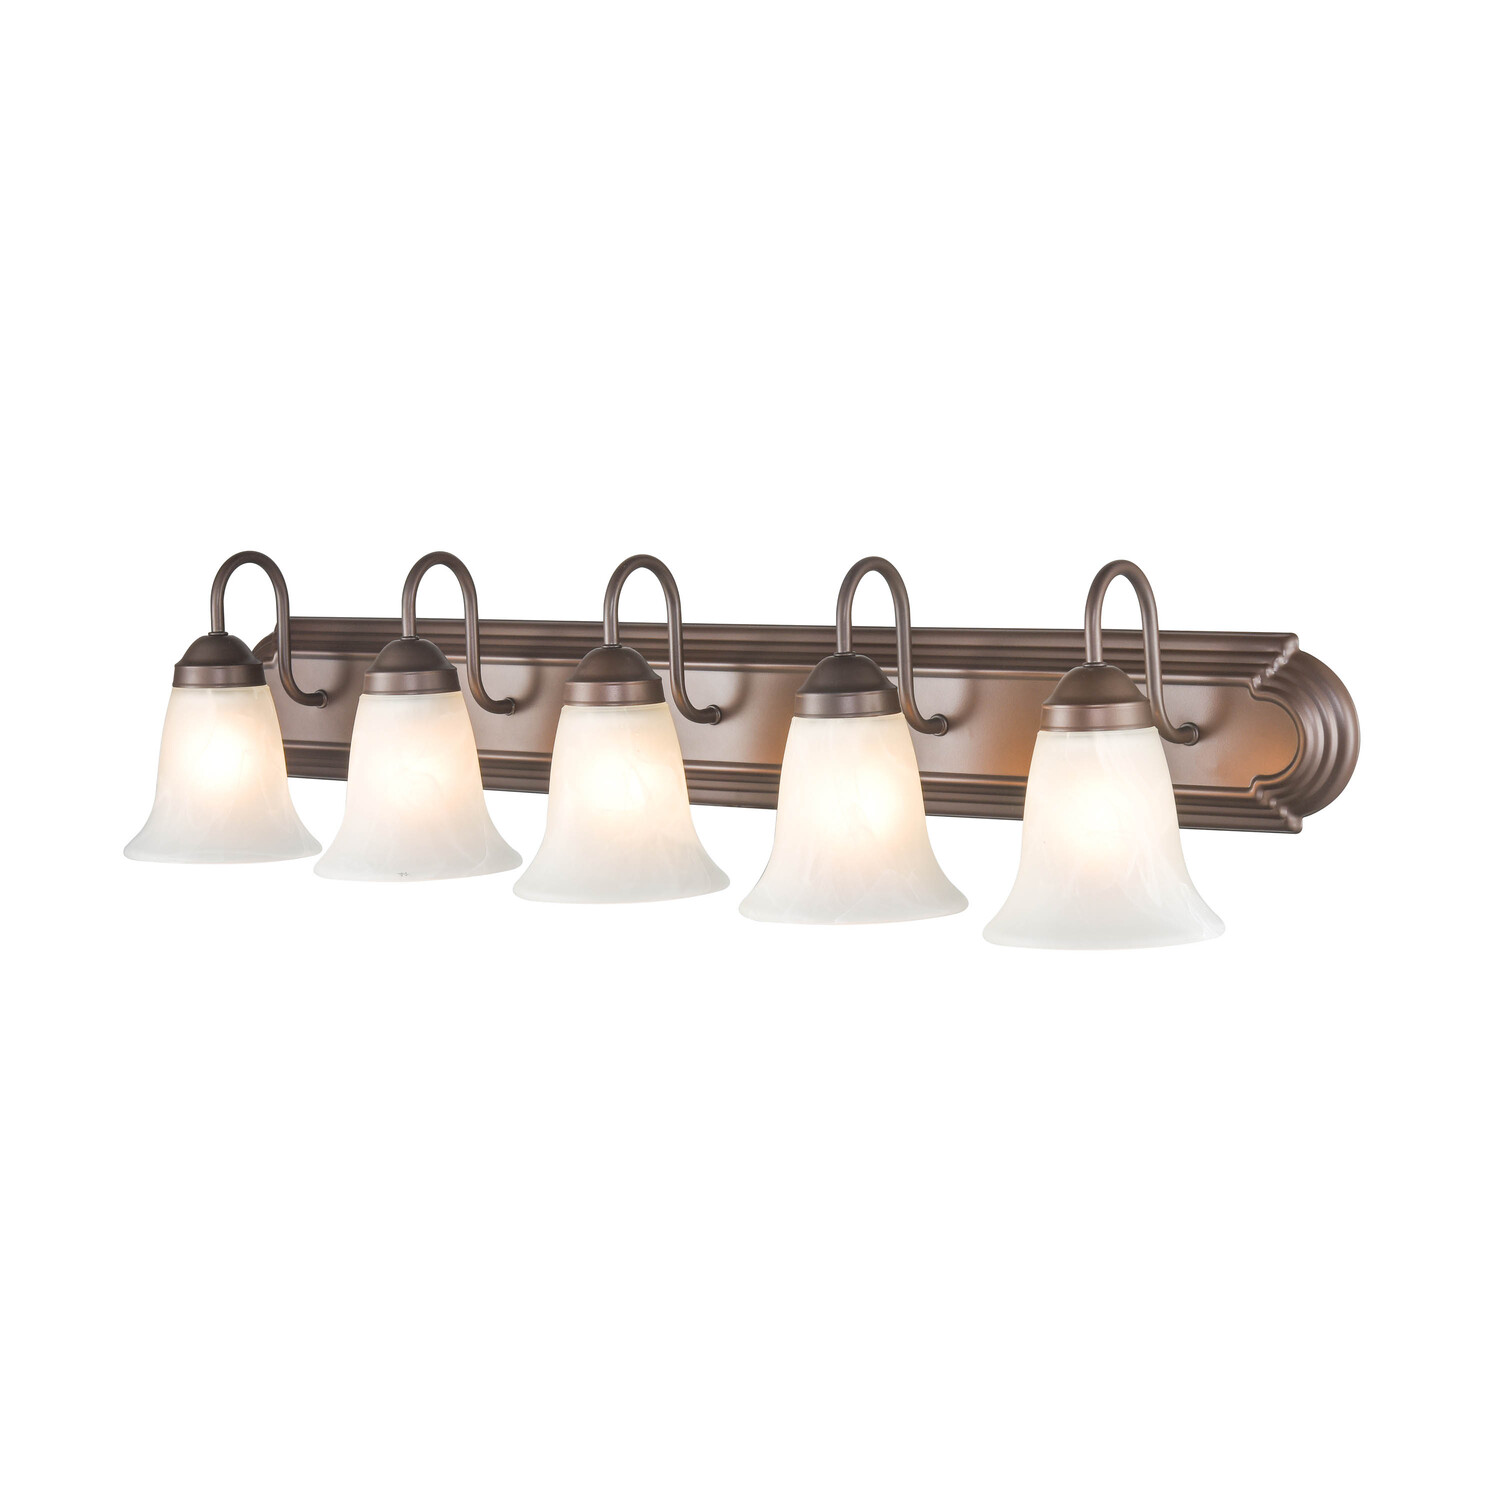 4285-BZ-Millennium Lighting-5 Light Bath Vanity-8.5 Inches Tall and 36 Inches Wide-Bronze Finish - image 5 of 6